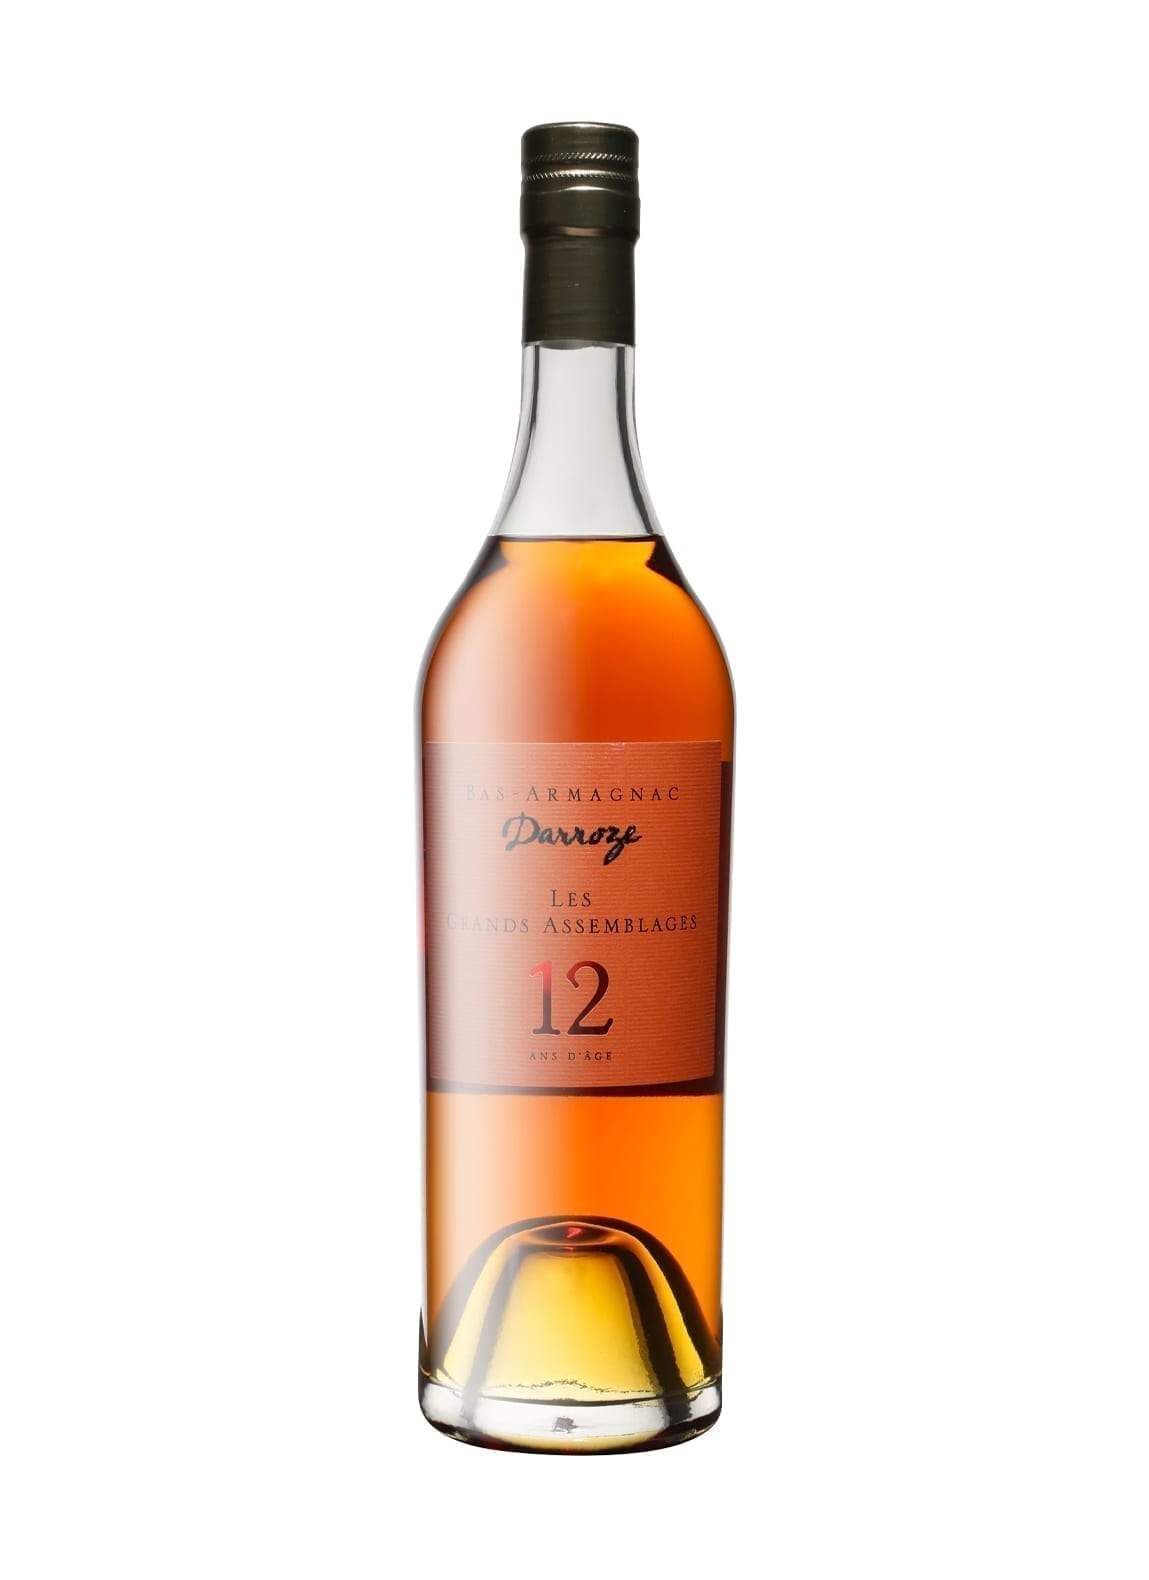 Darroze Grand Bas Armagnac Les Grands Assemblages 12 years 43% 700ml | Brandy | Shop online at Spirits of France